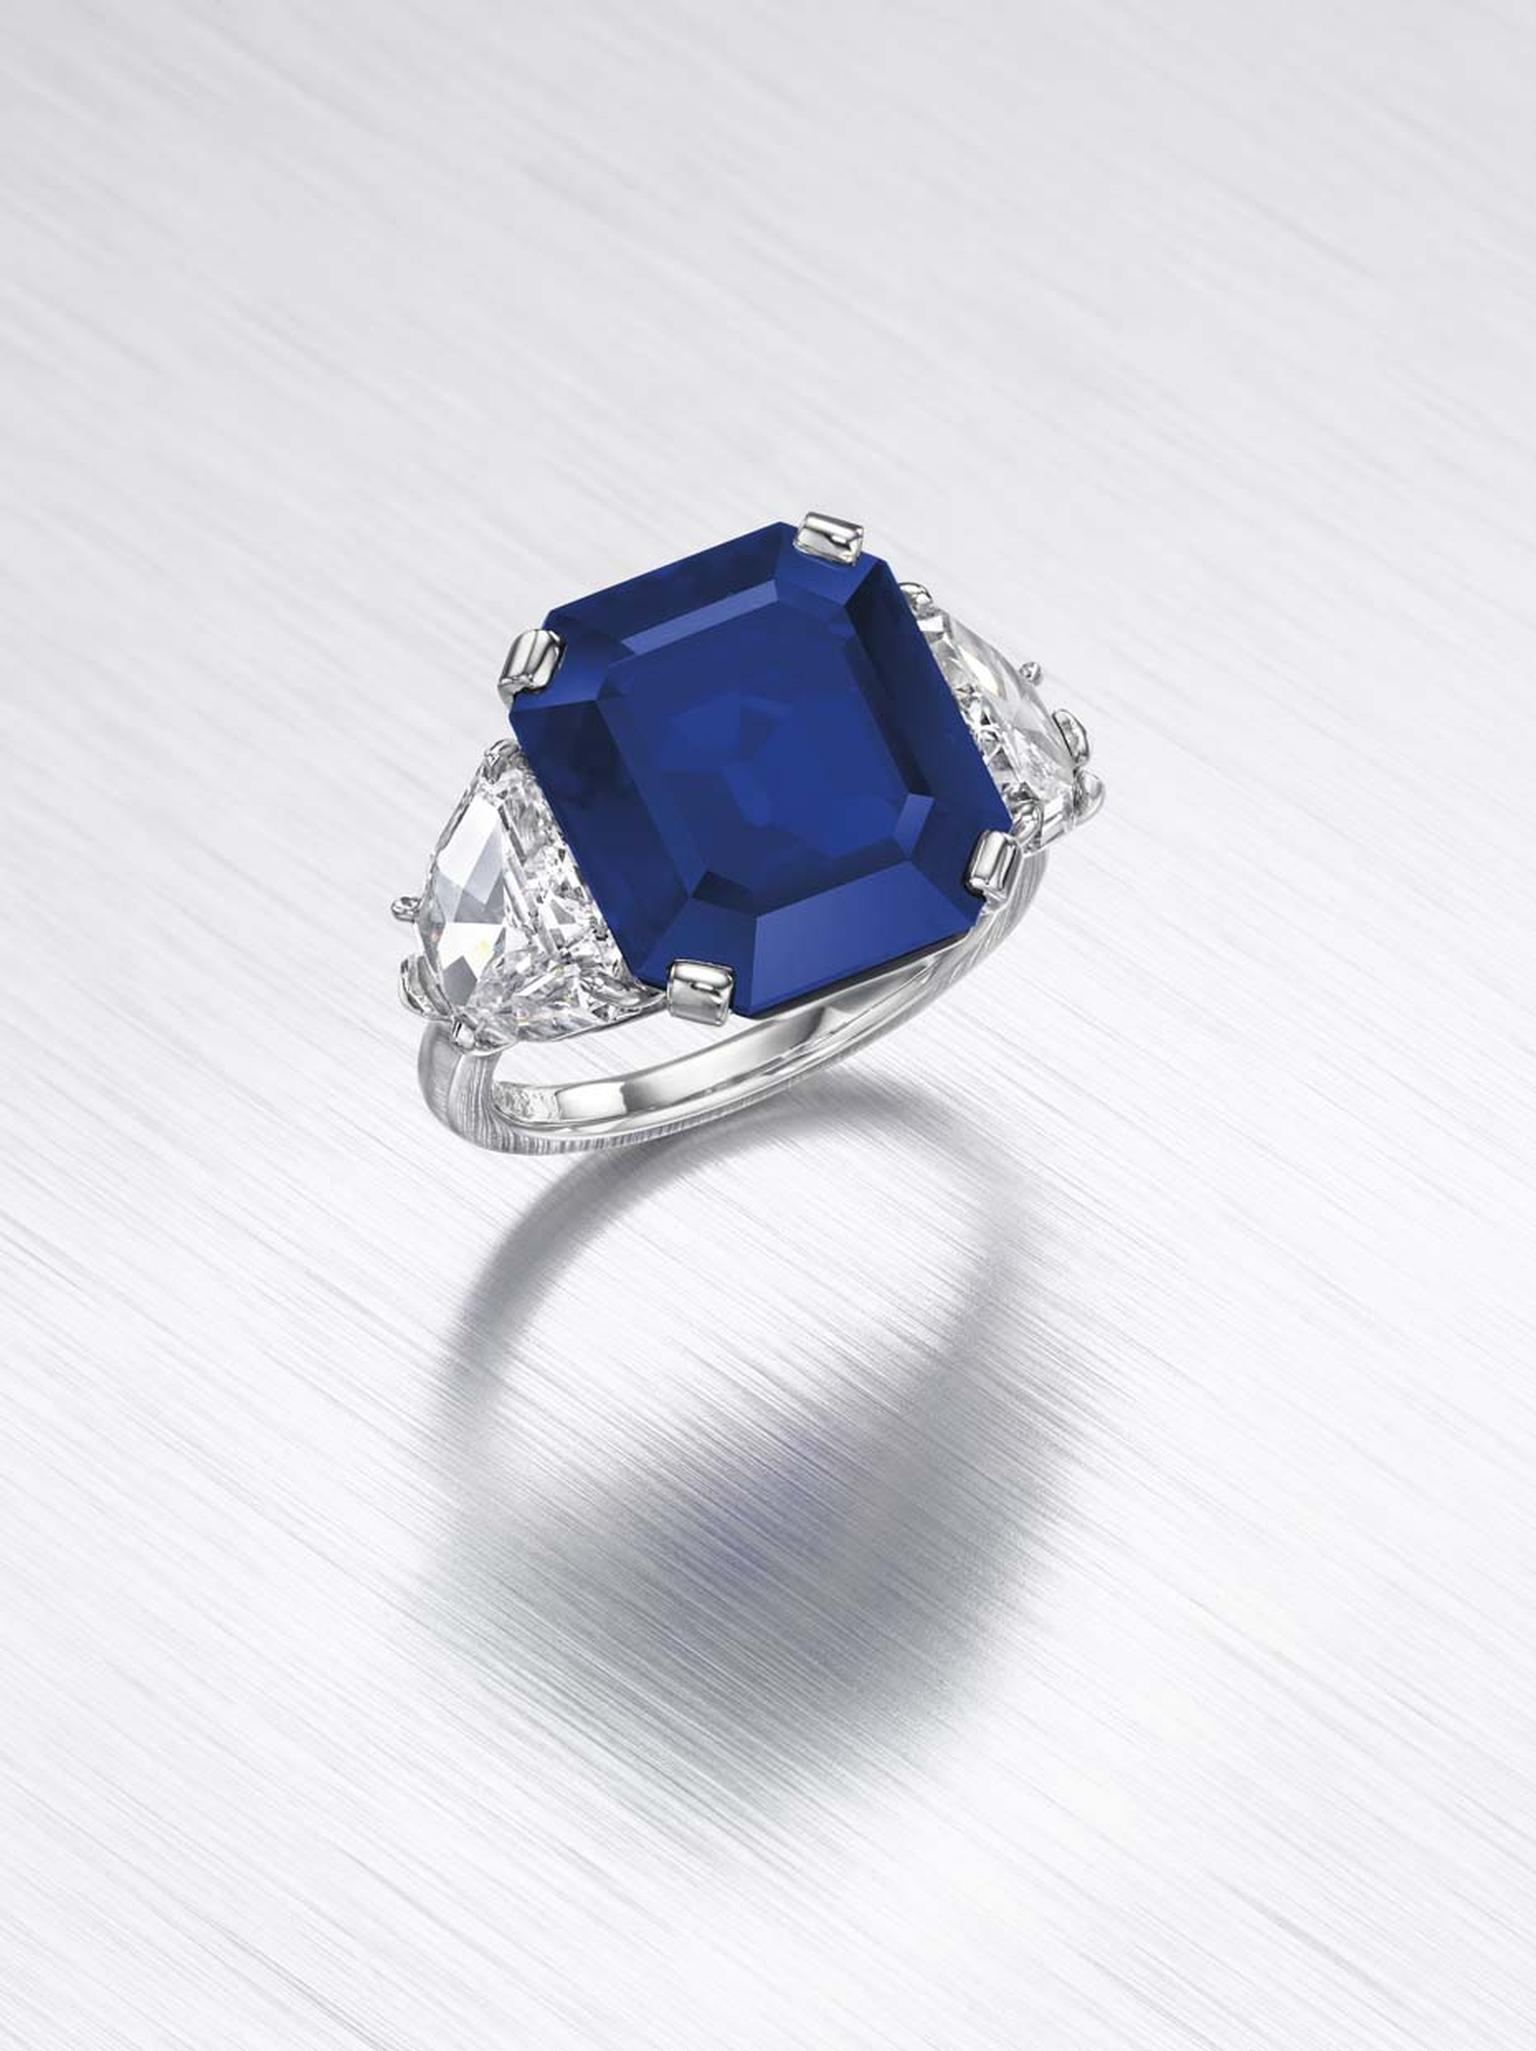 This wonderful, deep blue octagonal-cut Kashmir sapphire of 11.88 carats, set into a diamond ring, is among the 300 lots at Christie's Magnificent Jewels auction in New York.